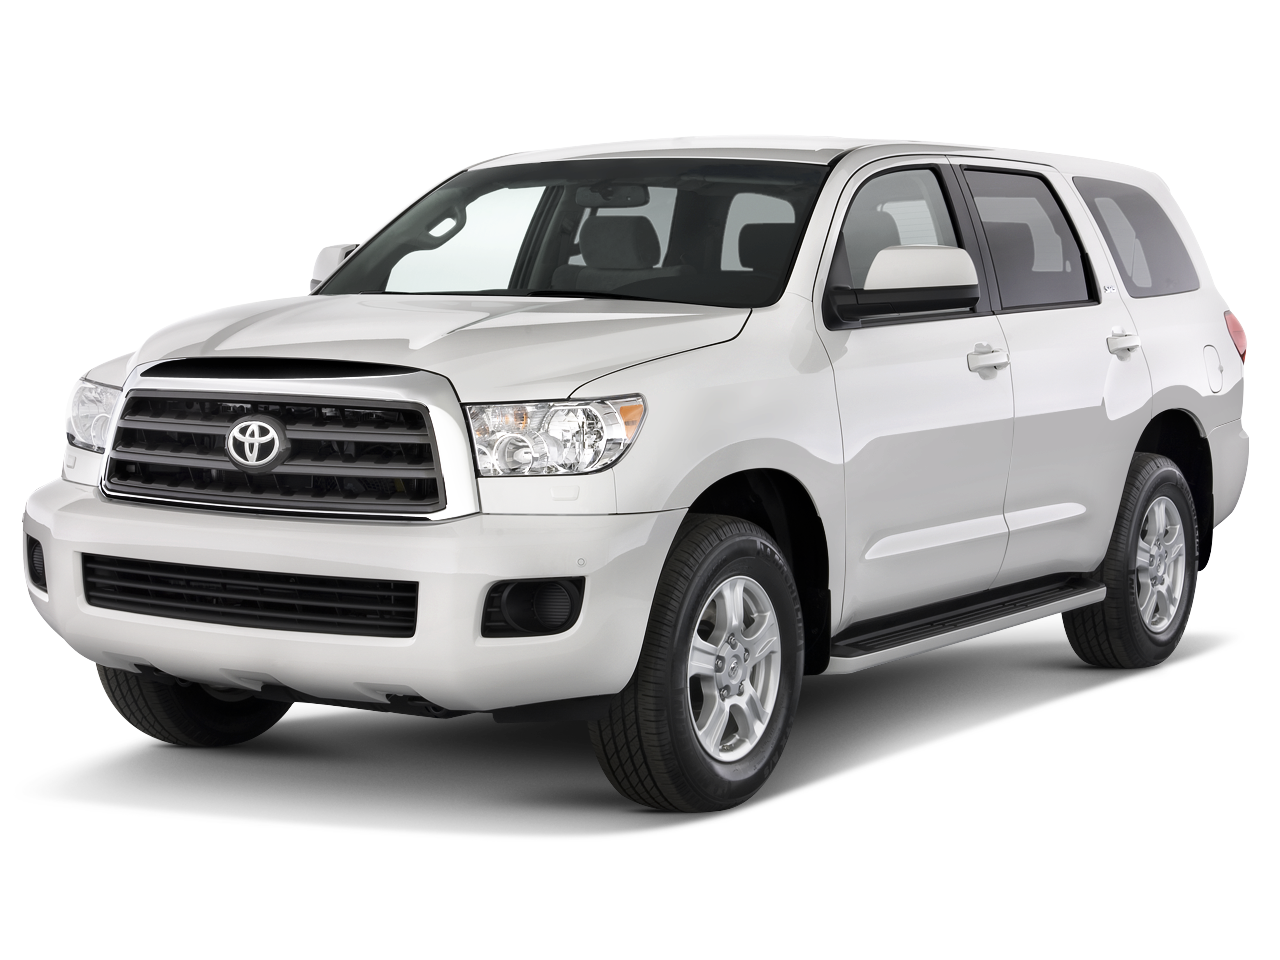 2013 Toyota Sequoia Prices, Reviews, and Photos - MotorTrend